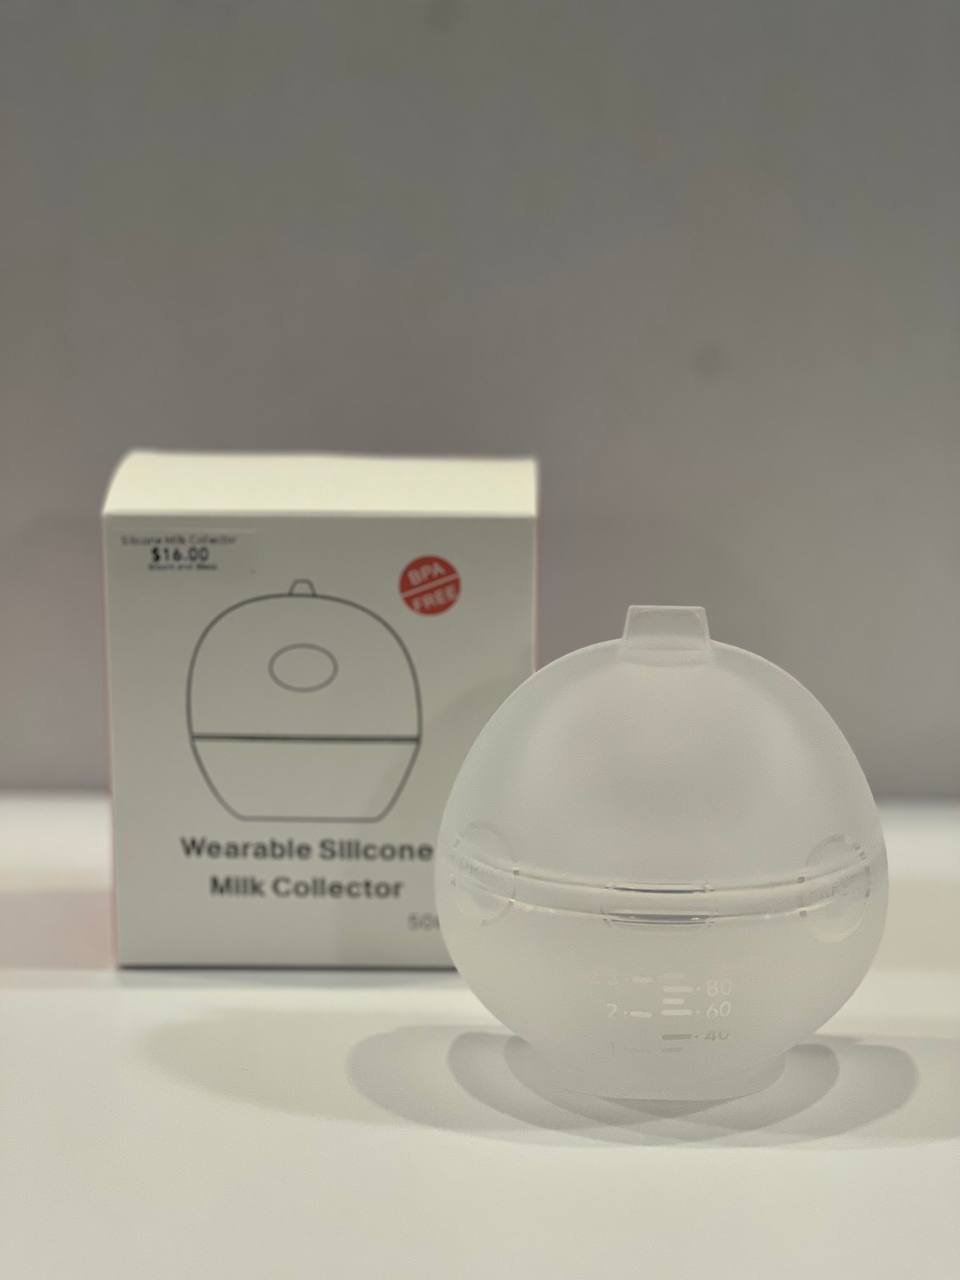 Wearable Baby Milk Collector